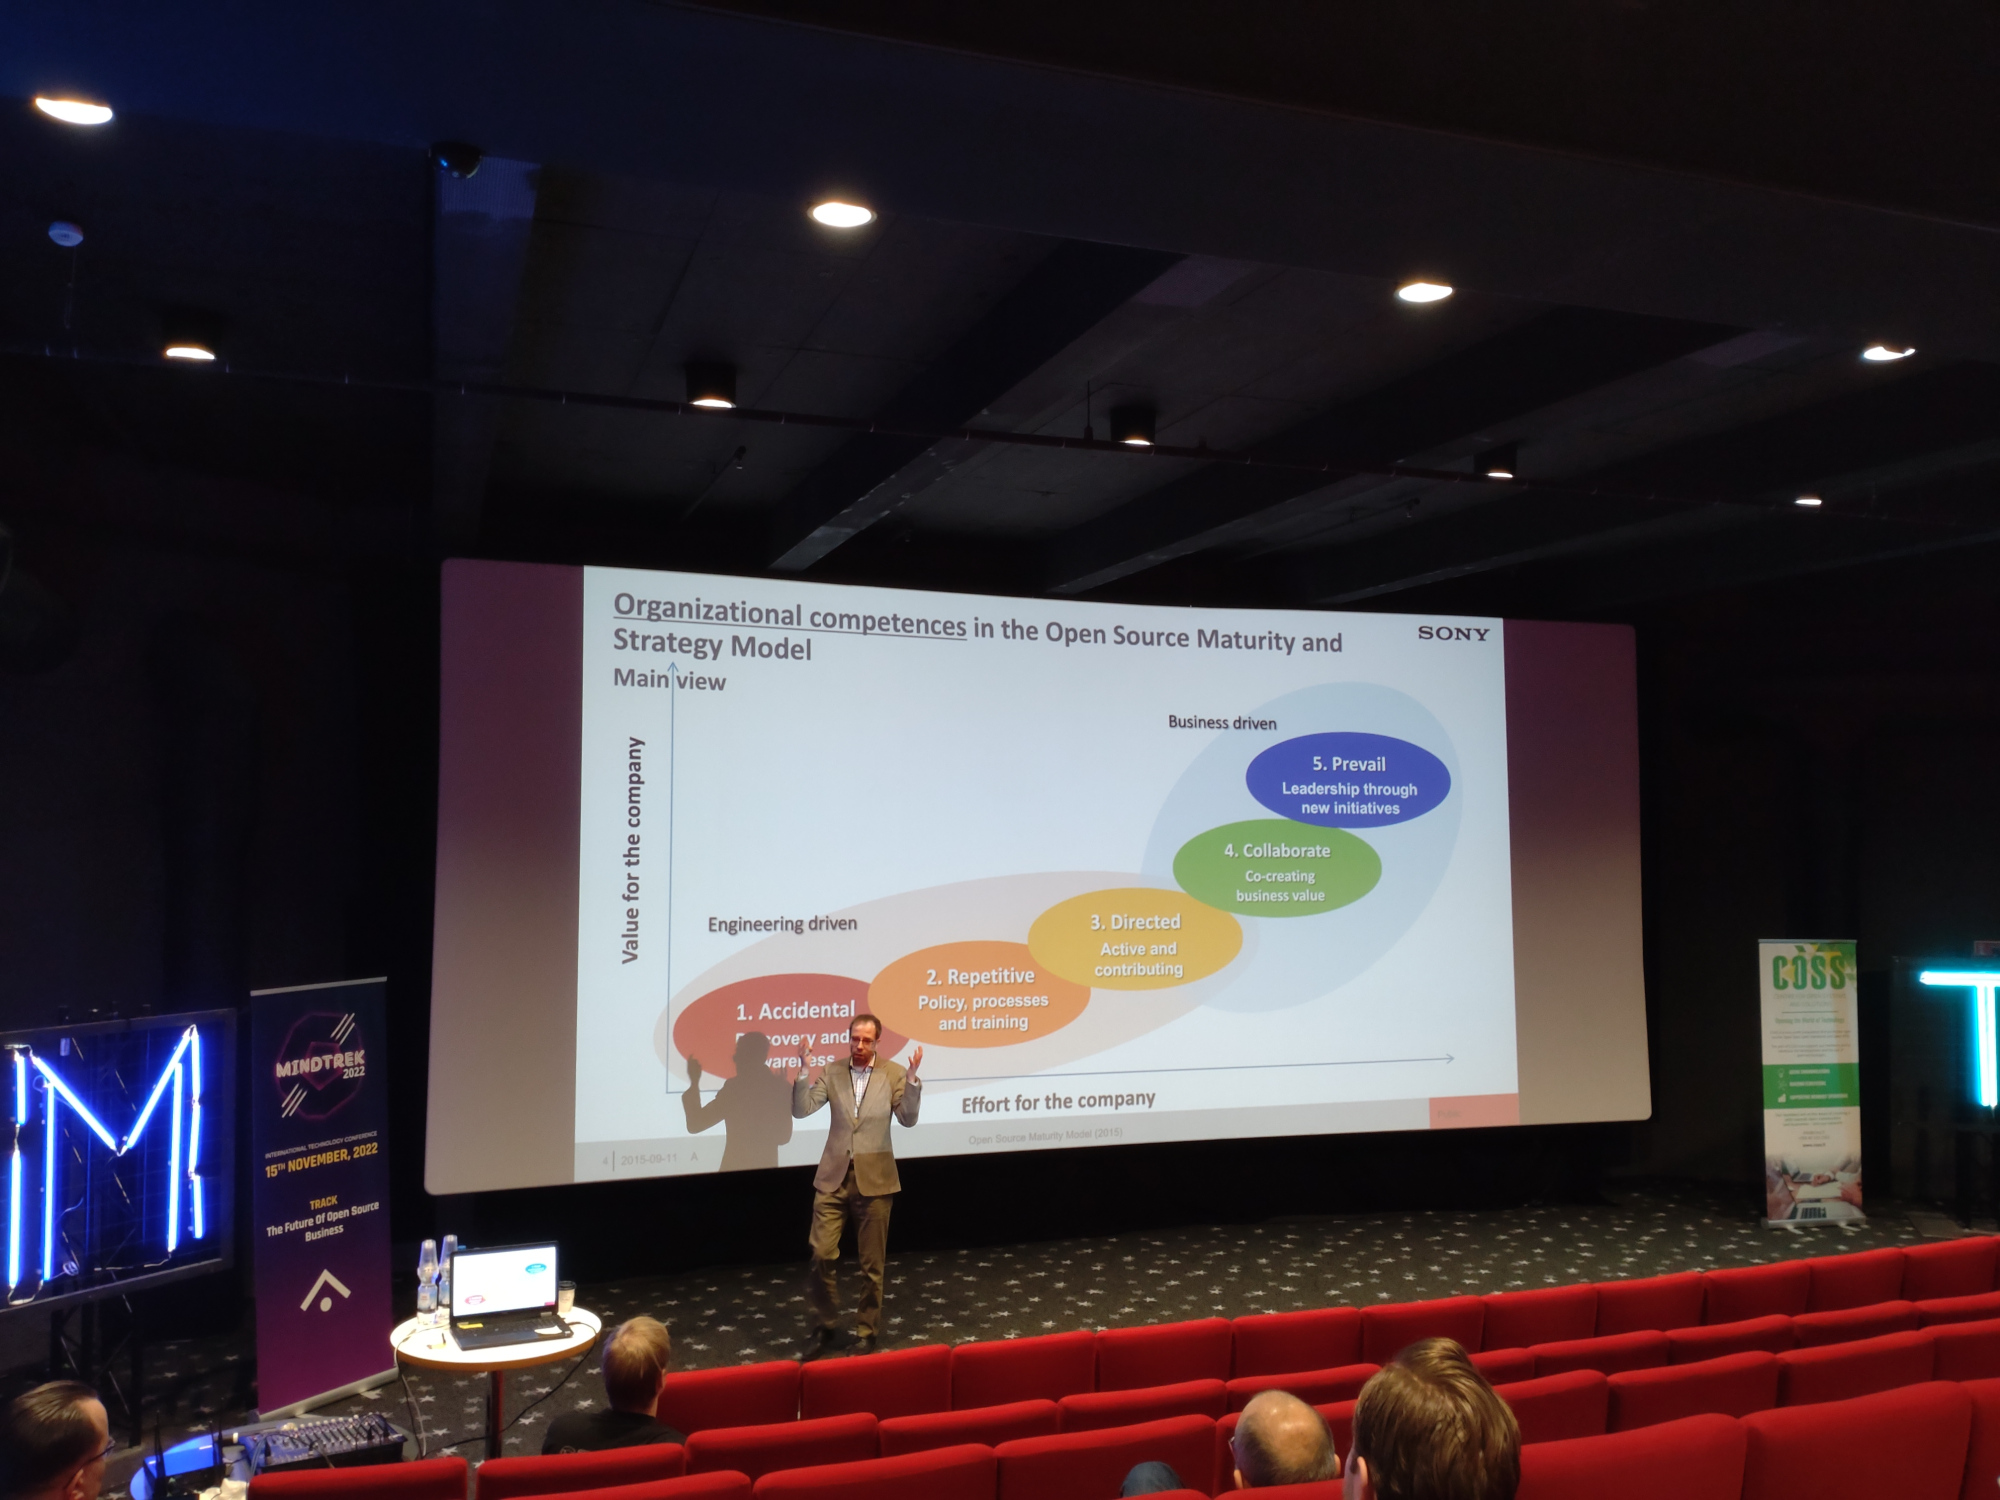 Open source maturity model from Mindtrek 2022. Applicable to the European Commission's open source journey as well. Photo: Samuli Seppänen, 2022